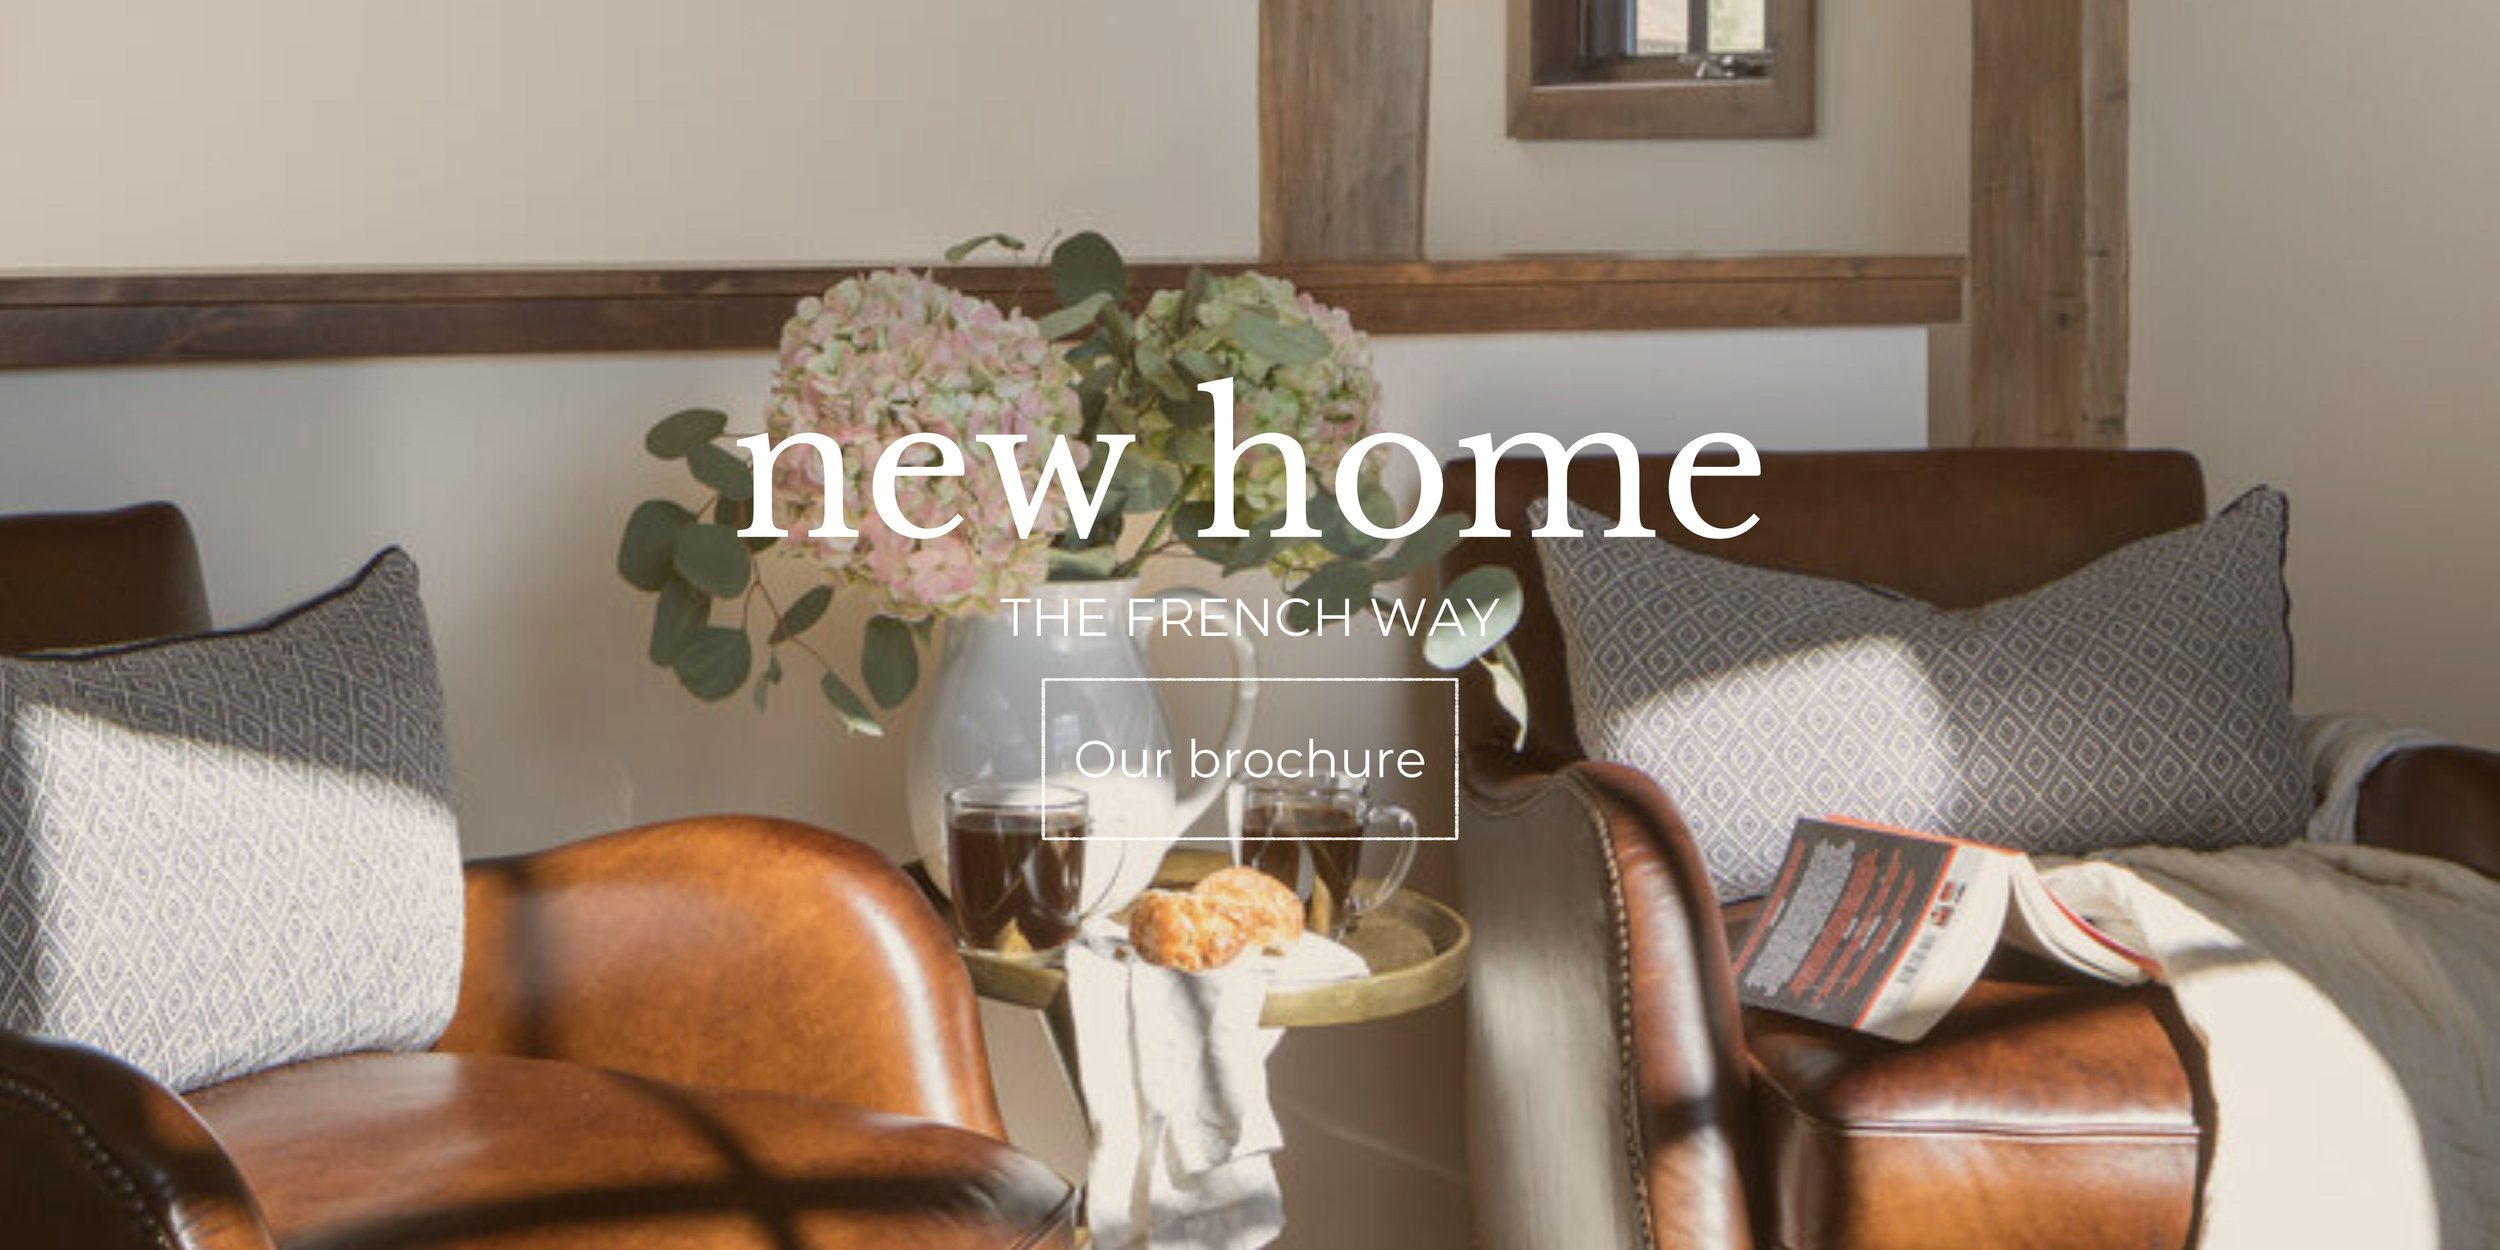  New home-the french way: Download our brochure 